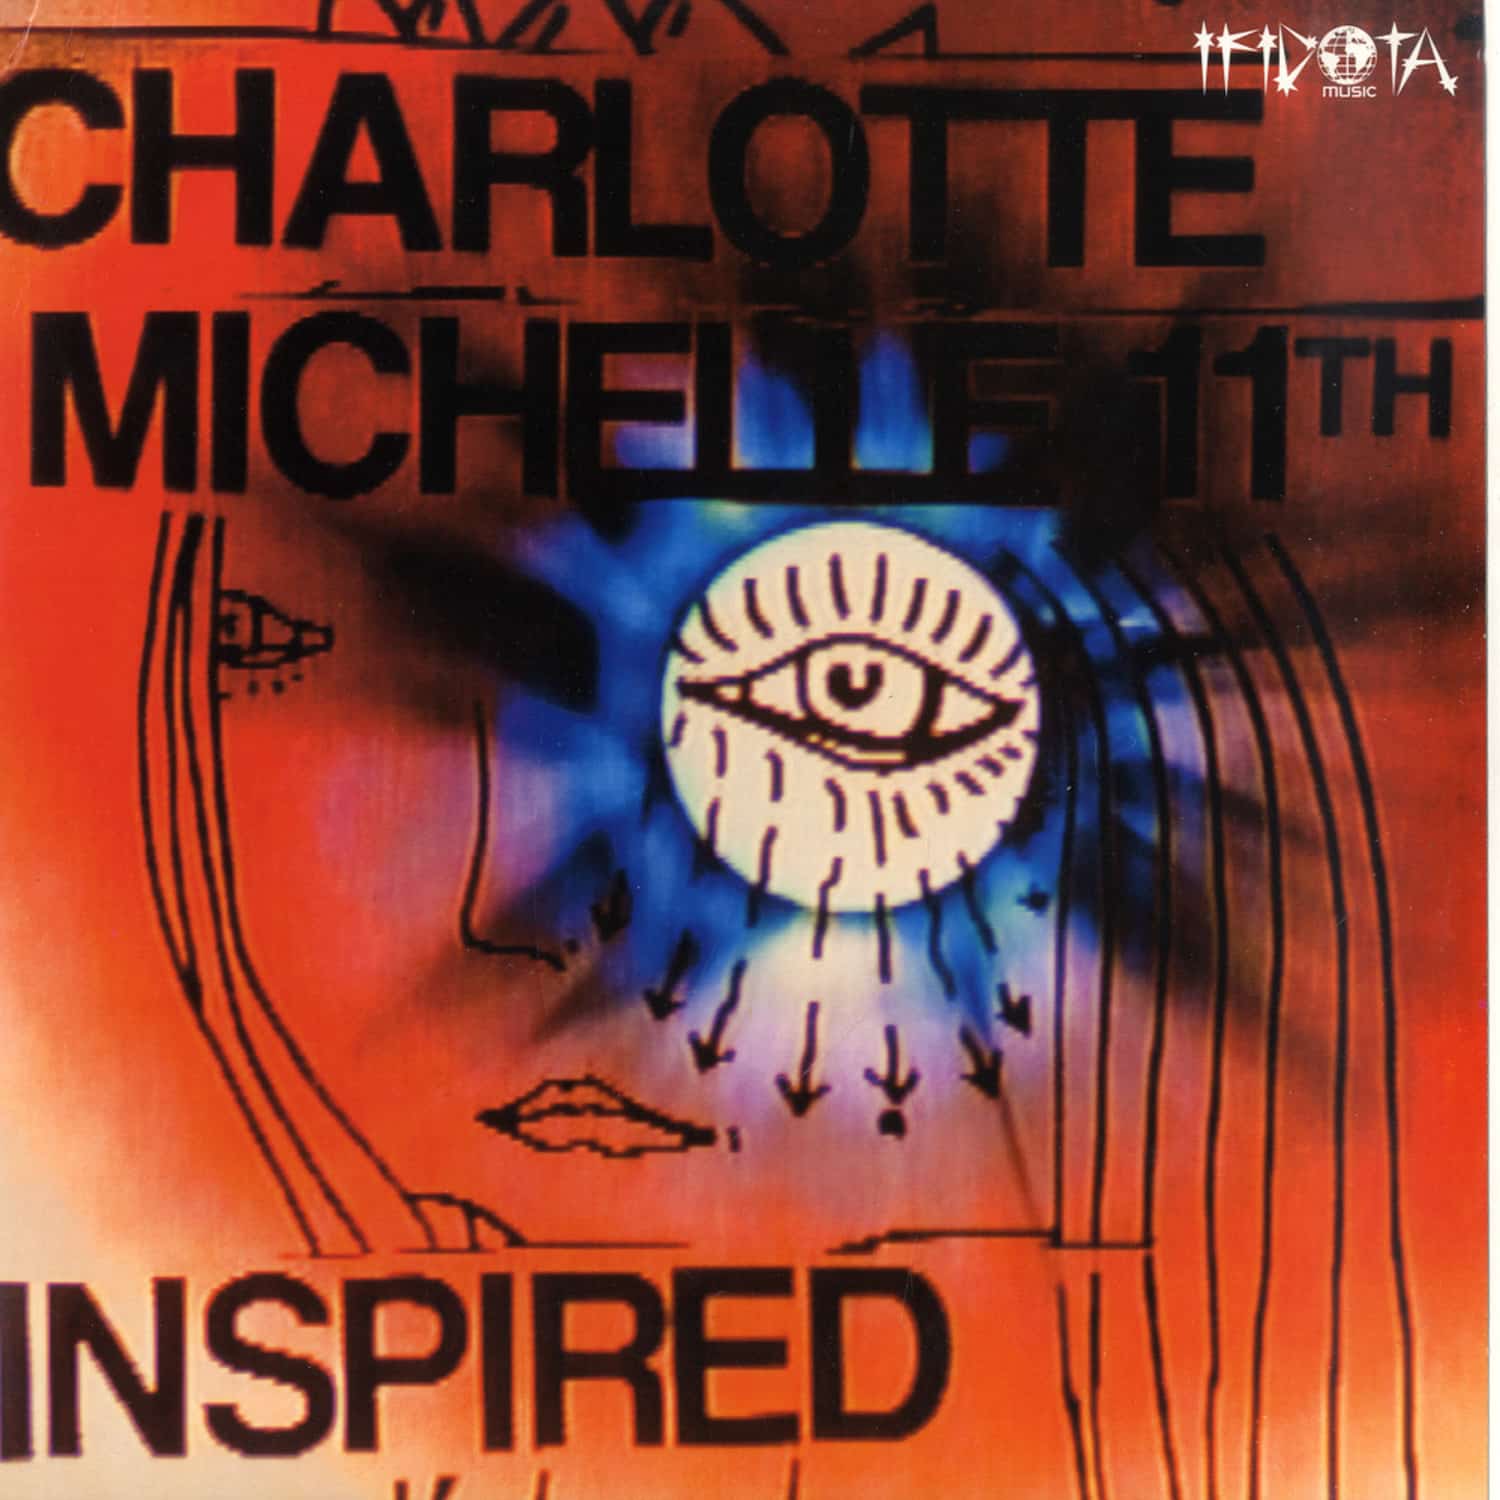 Charlotte Michelle 11th - INSPIRED